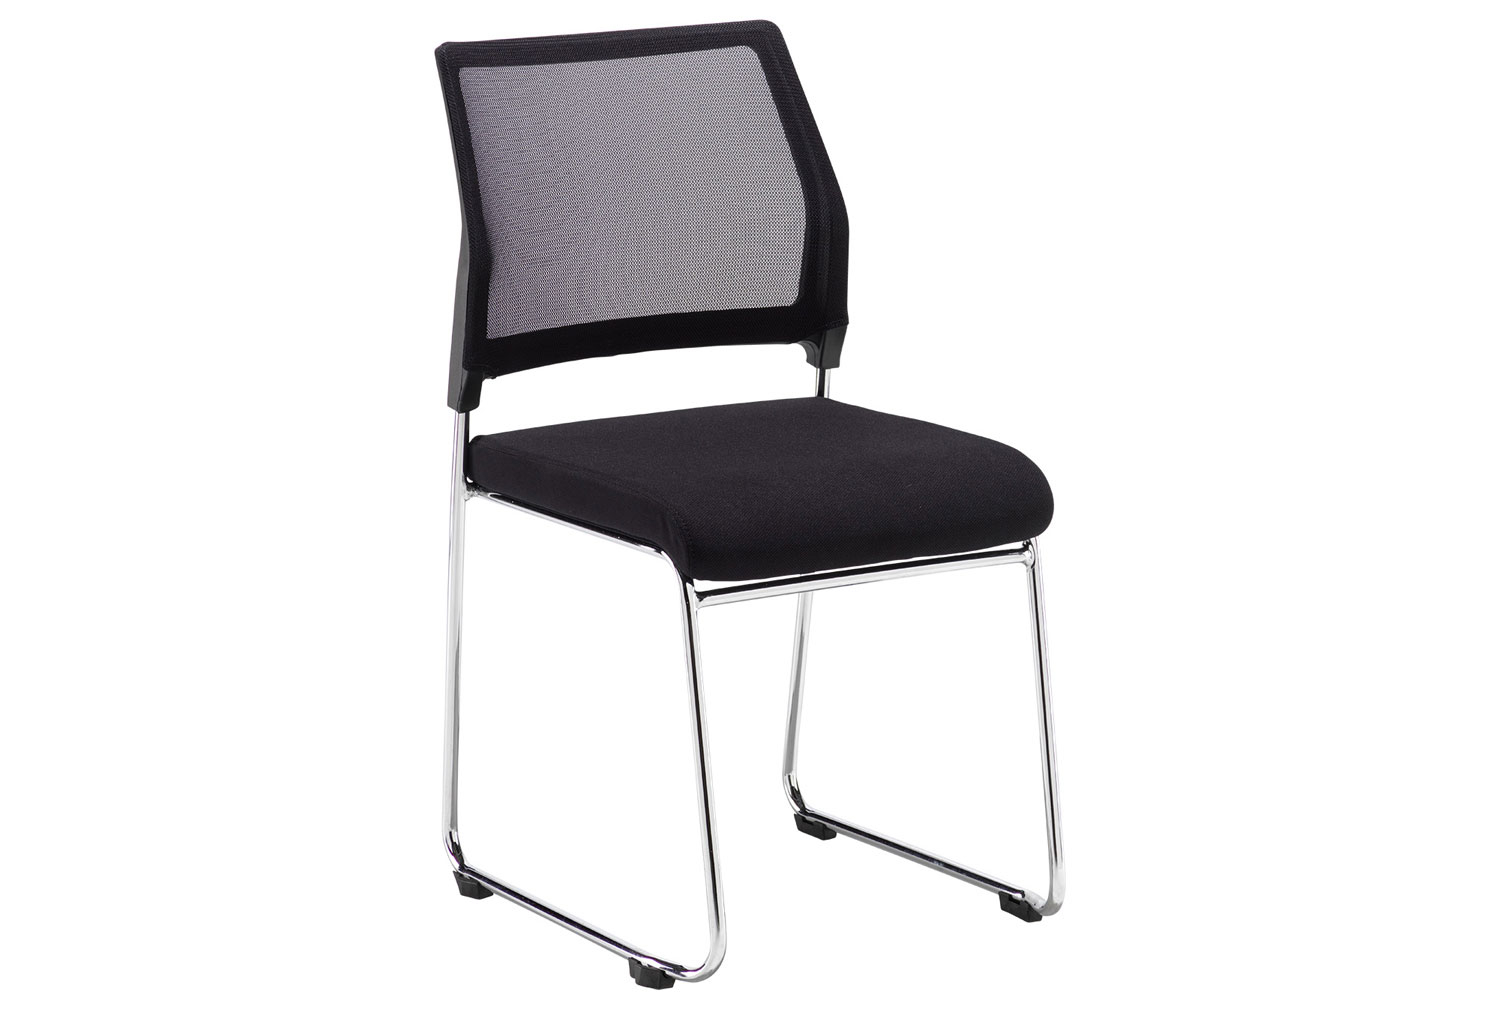 Pack of 4 Feddis Mesh Back Meeting Room Office Chairs, Express Delivery